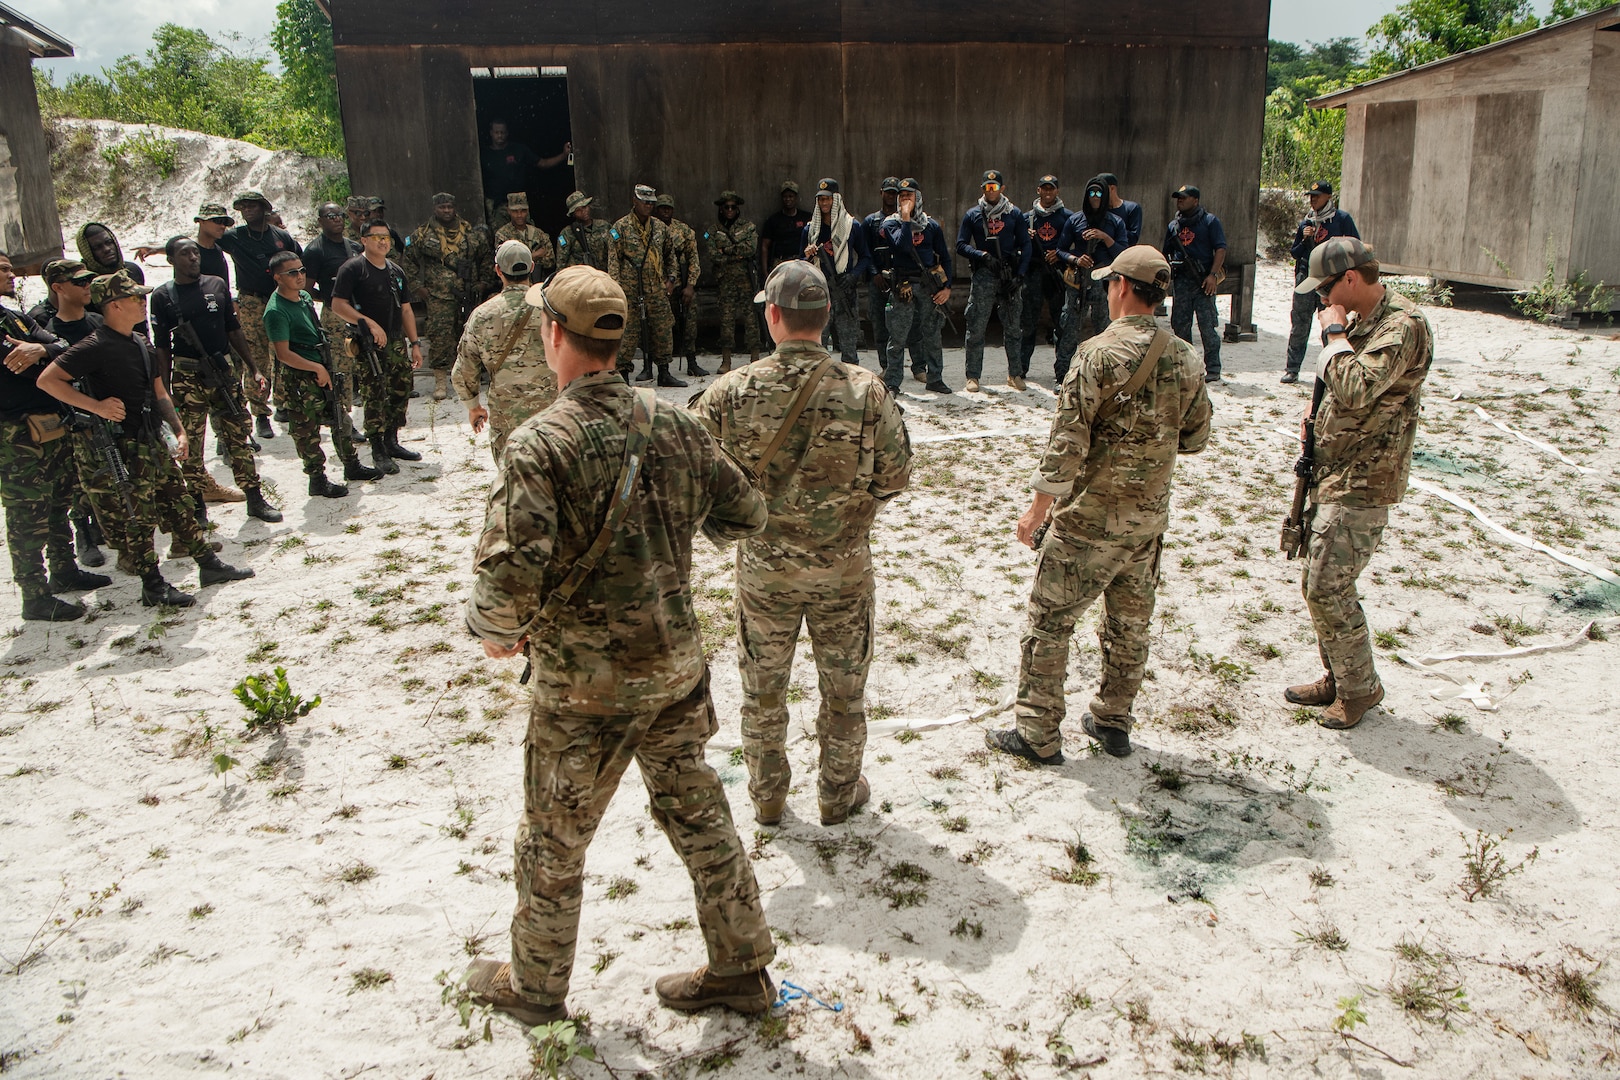 U.S. military forces demonstrate close quarters battle tactics to multinational military members